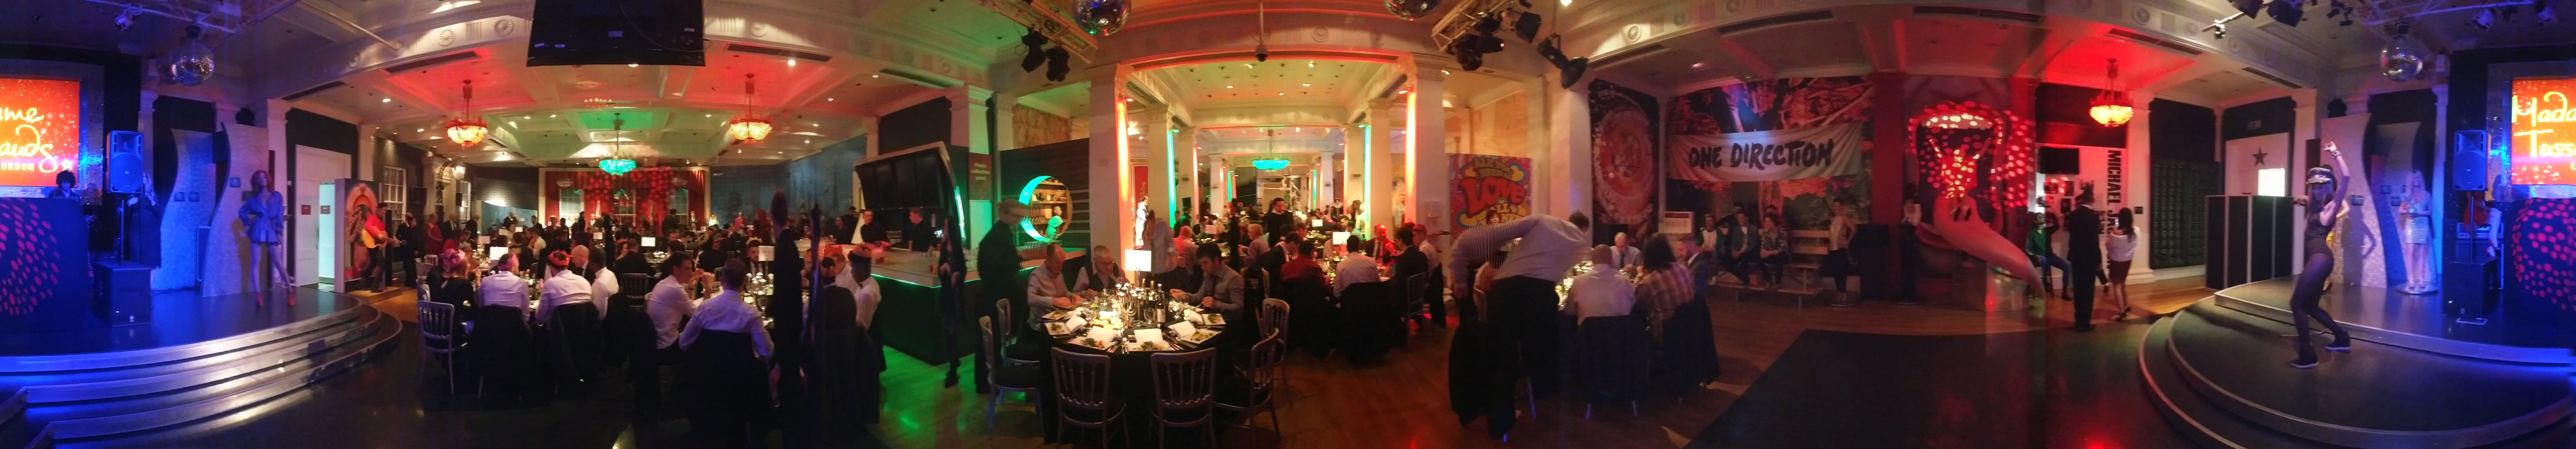 Madame Tussauds - Guests dining